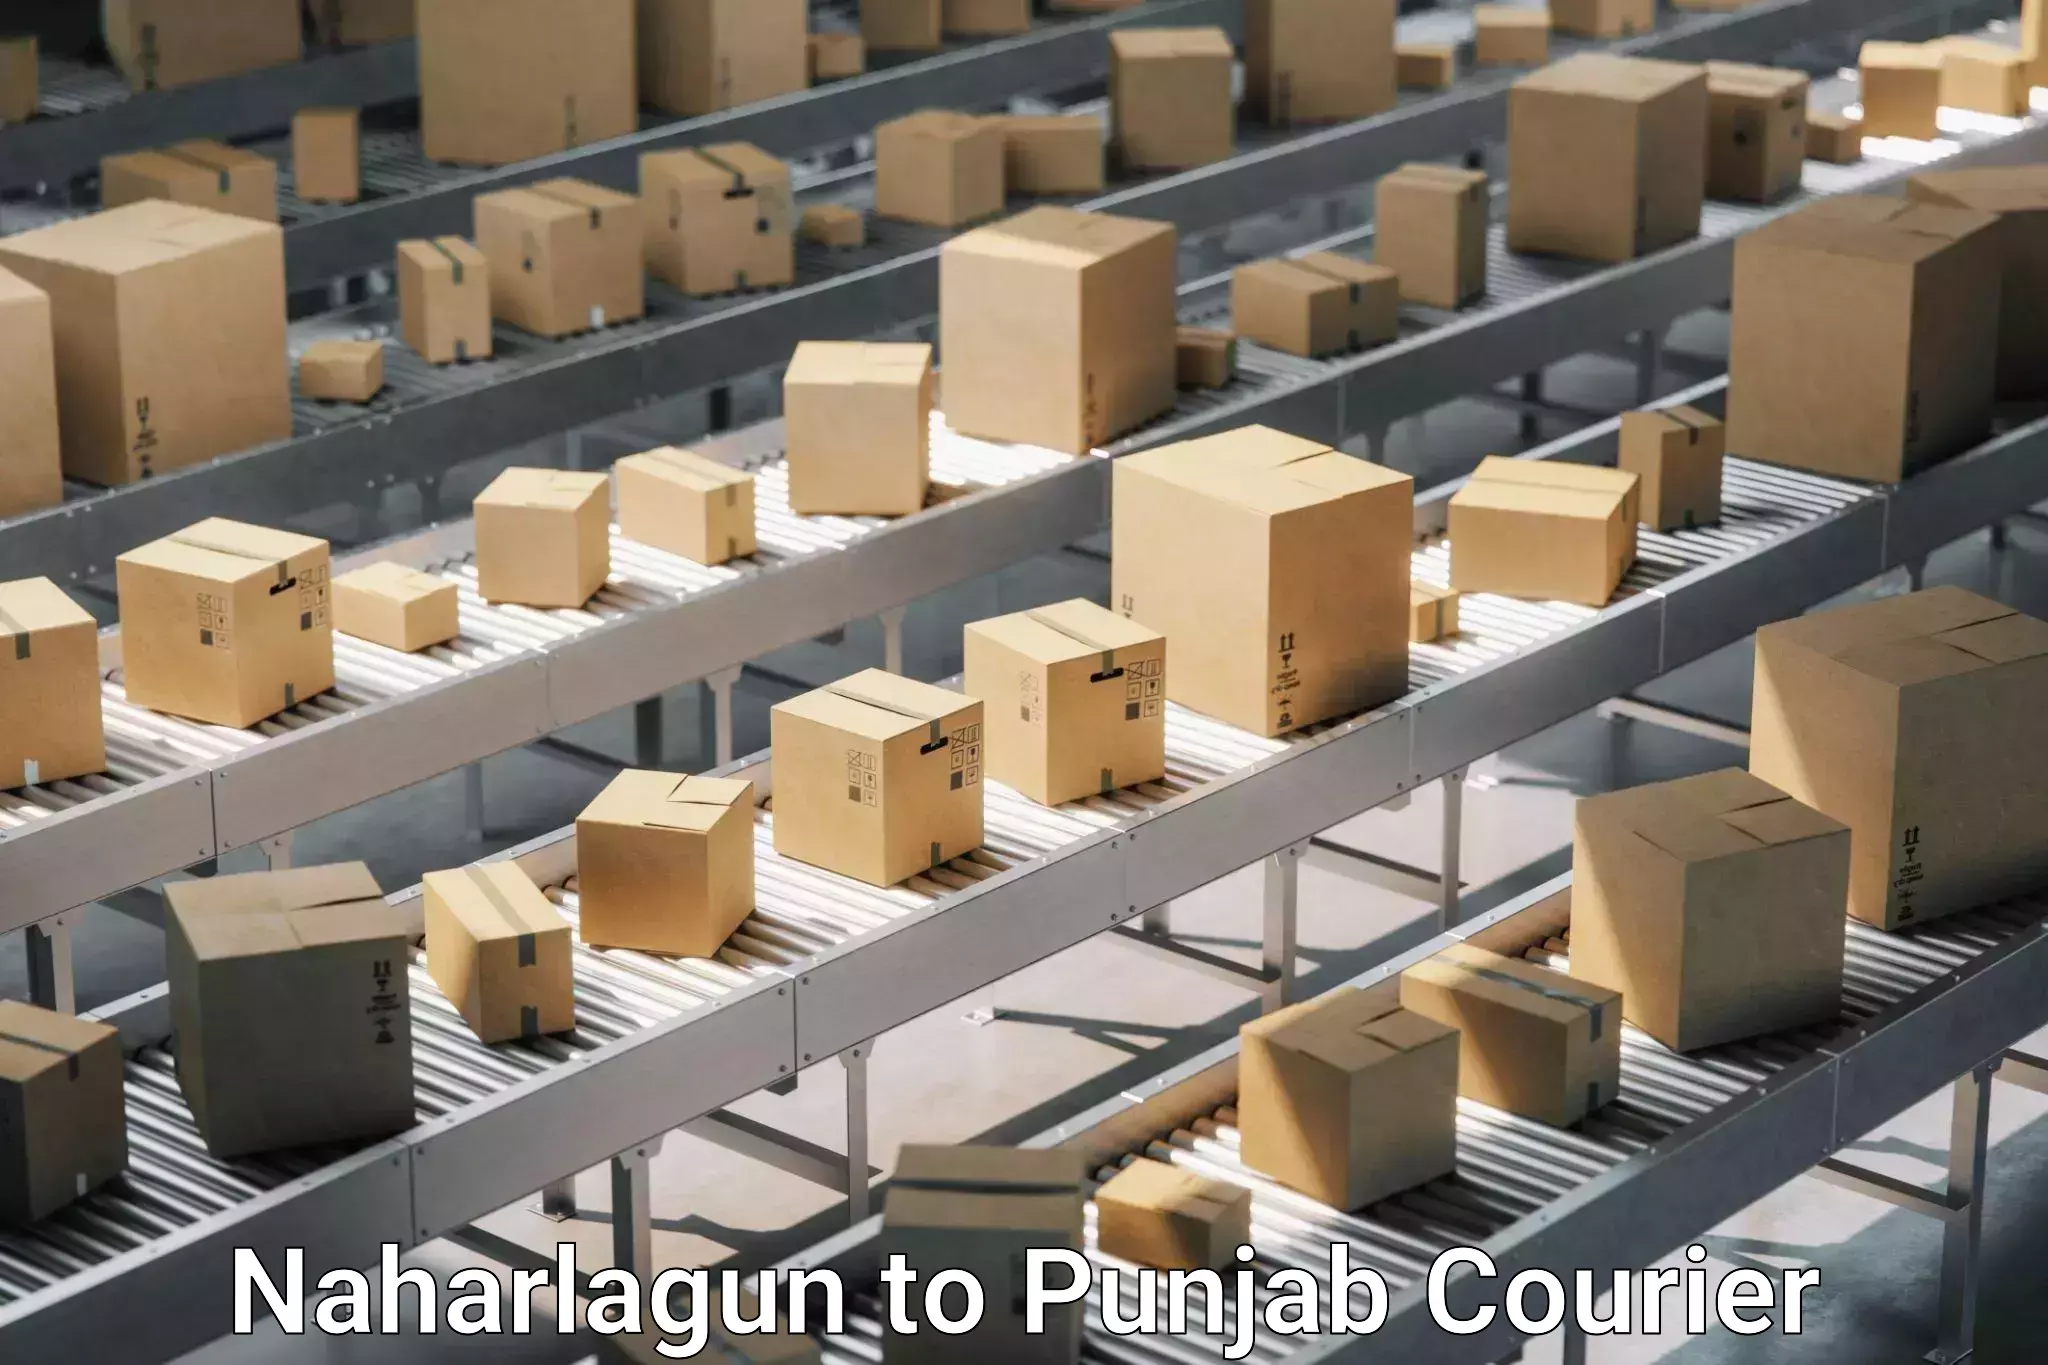 Quality relocation services in Naharlagun to Rajpura